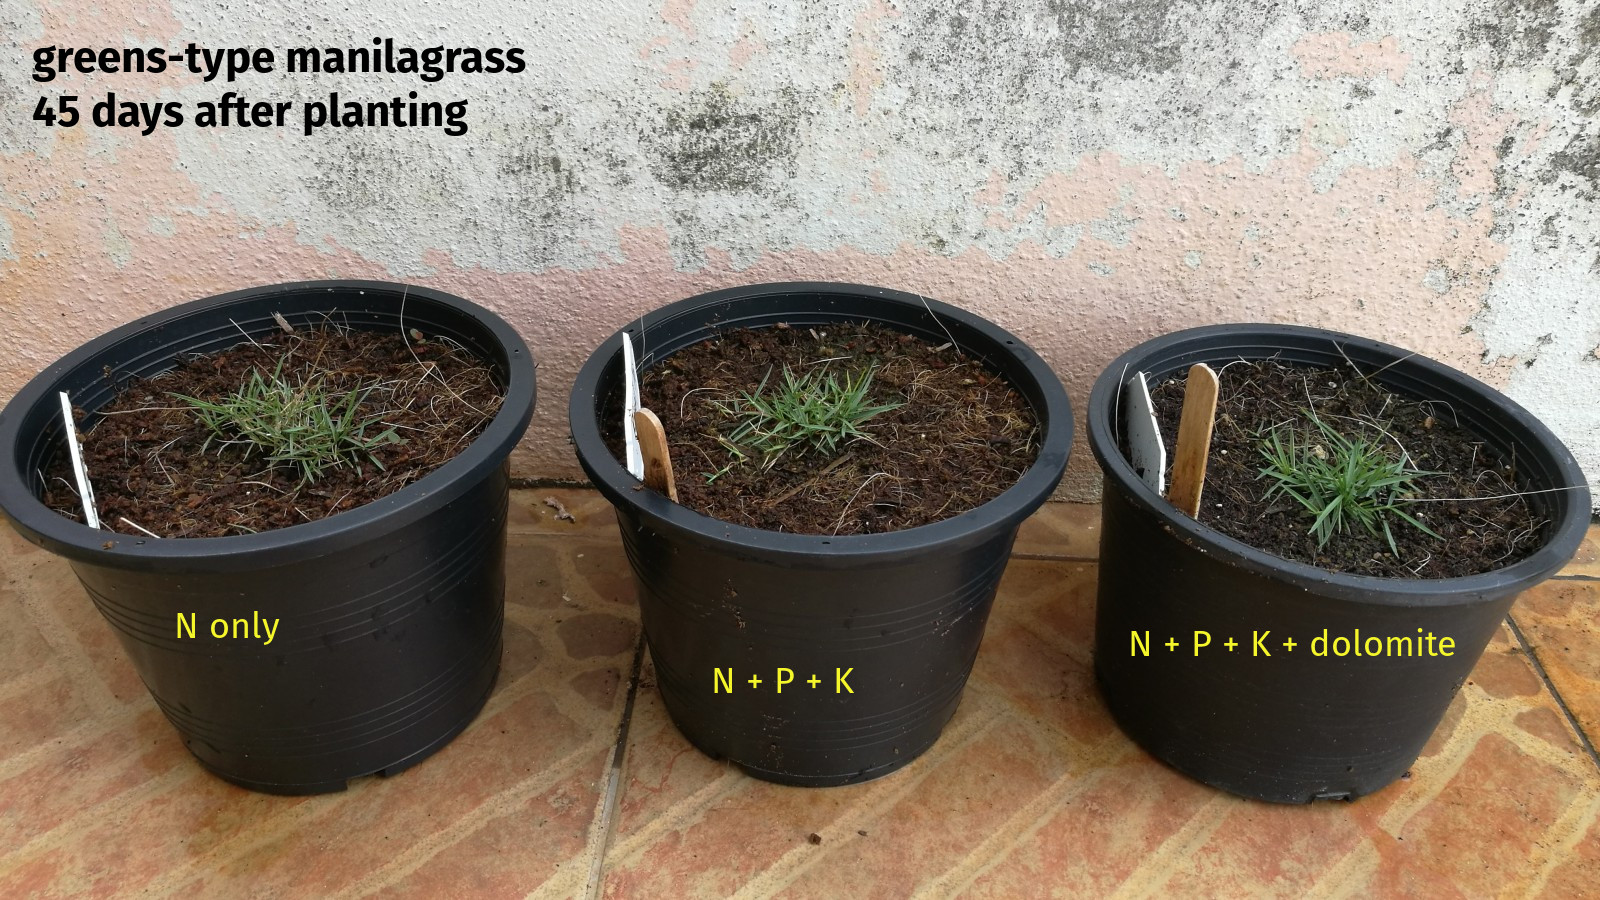 manilagrass after 45 days